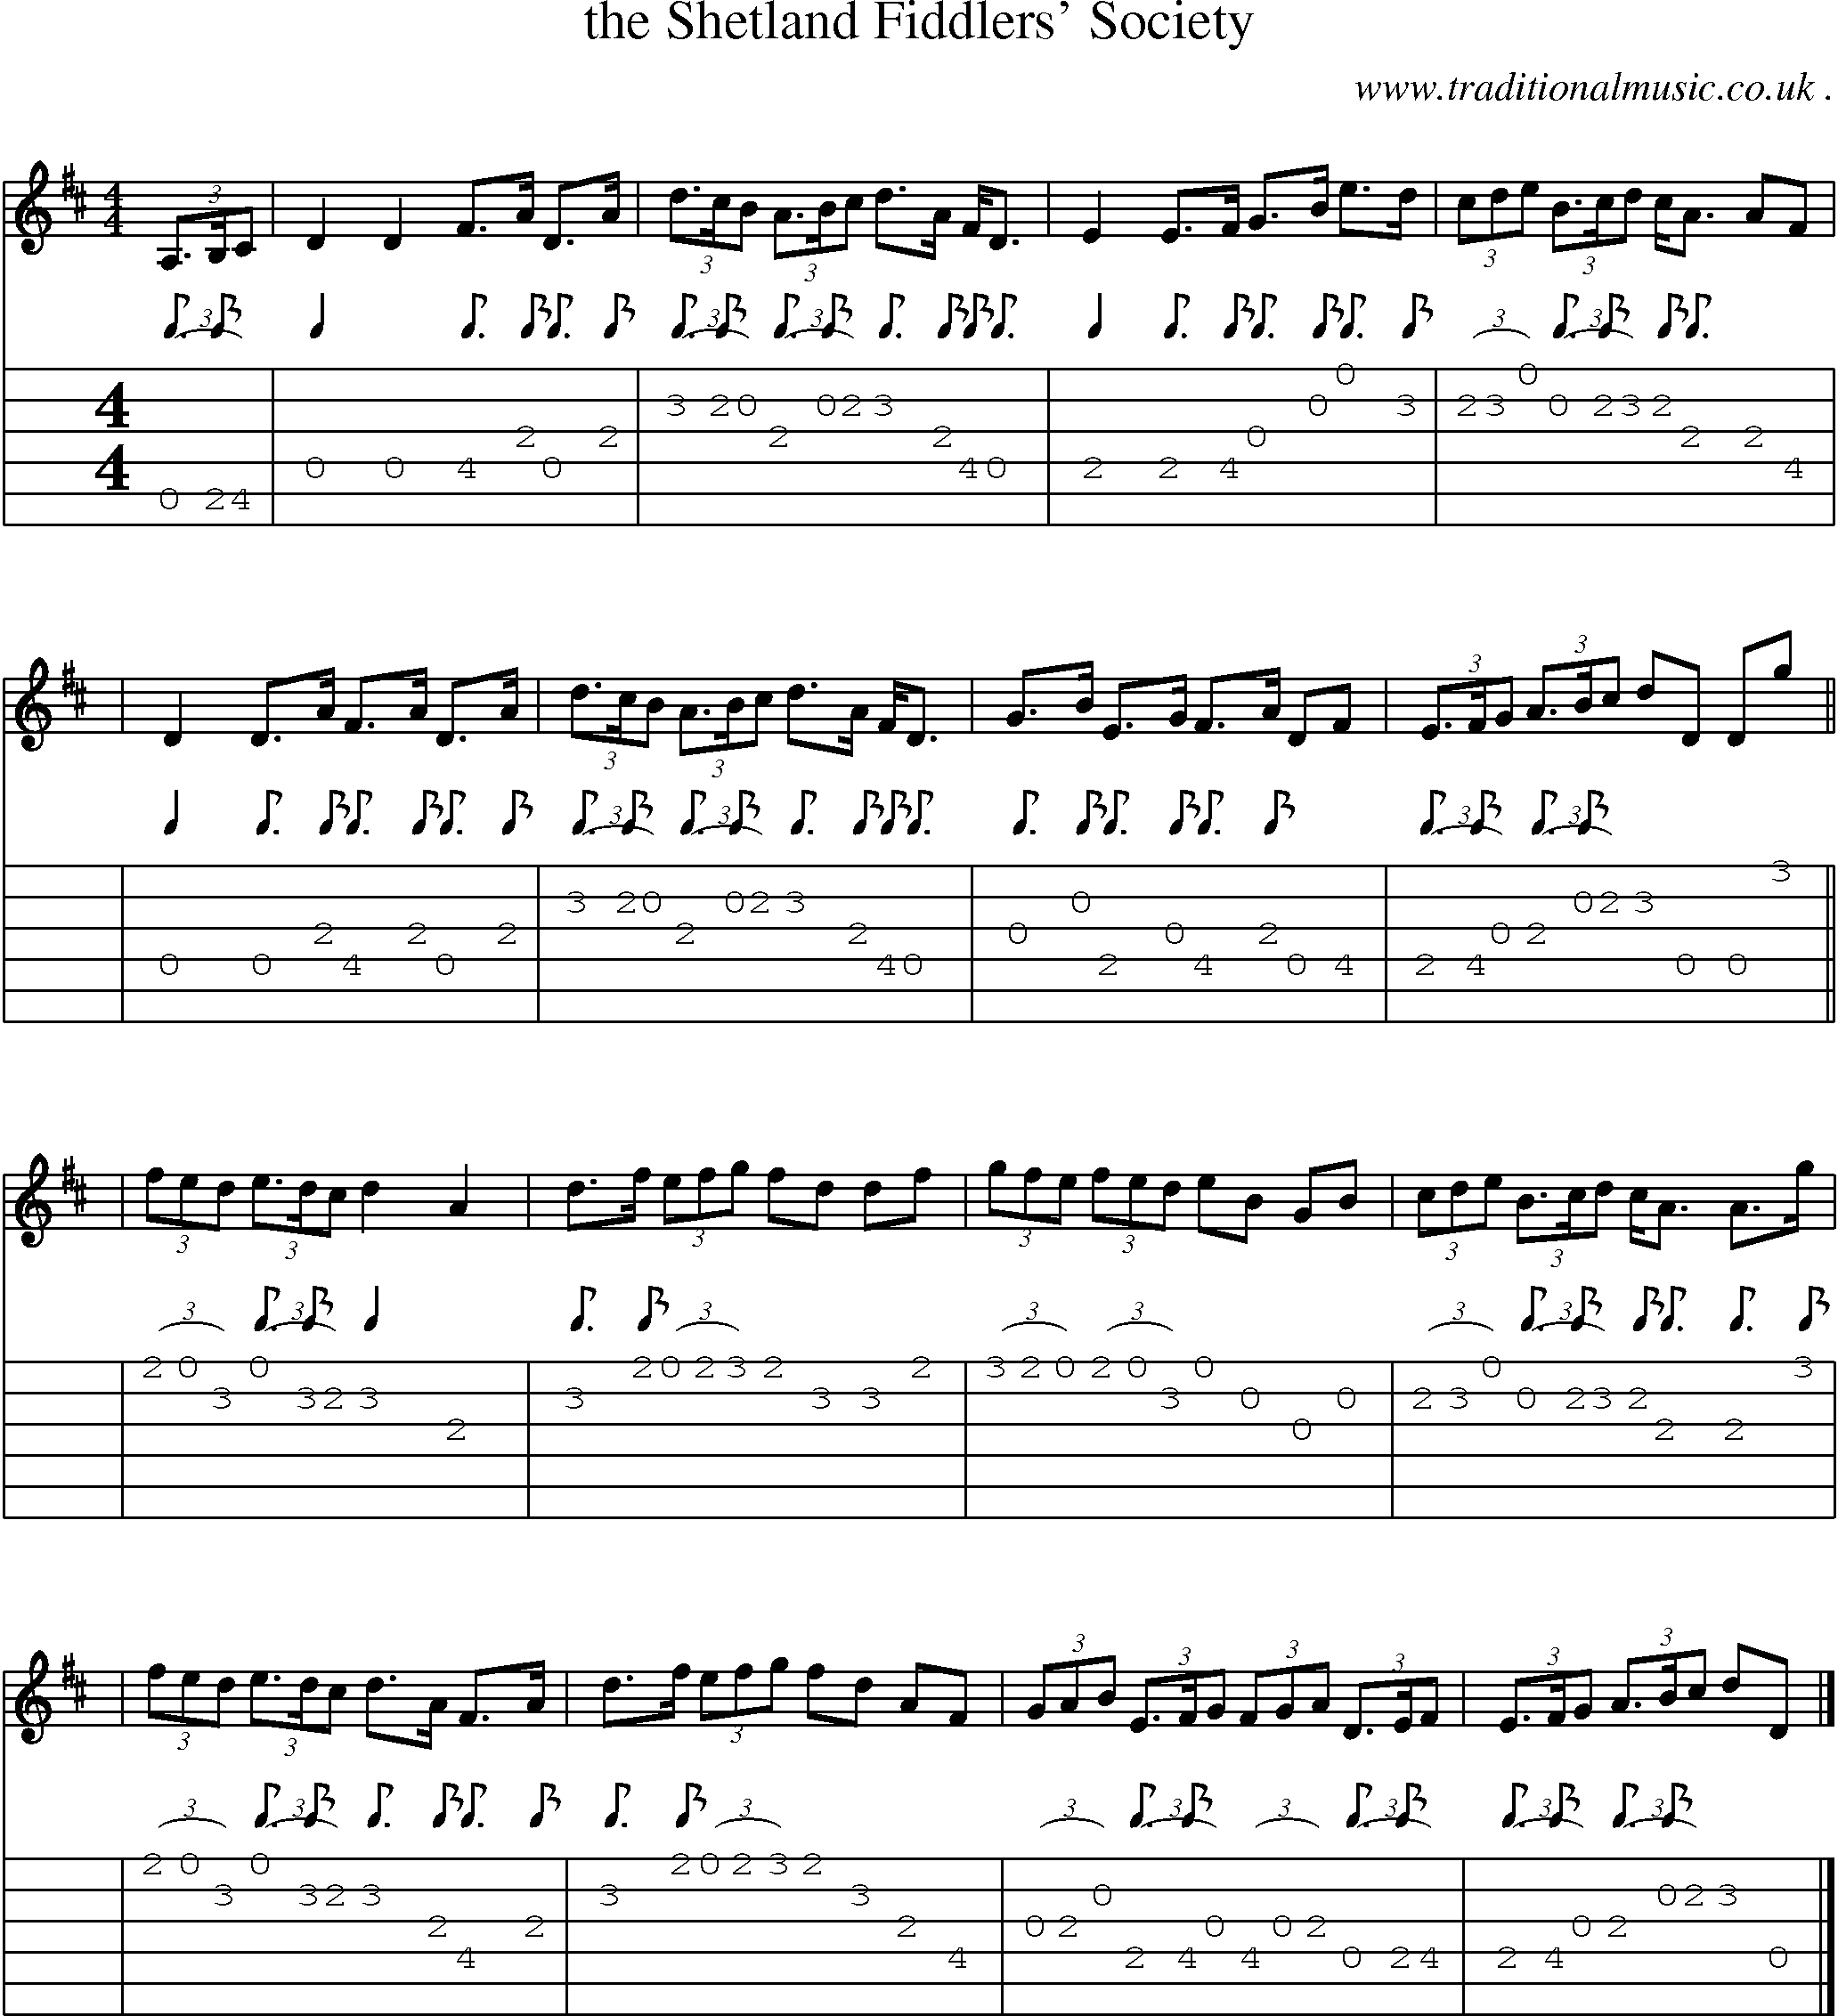 Sheet-music  score, Chords and Guitar Tabs for The Shetland Fiddlers Society1